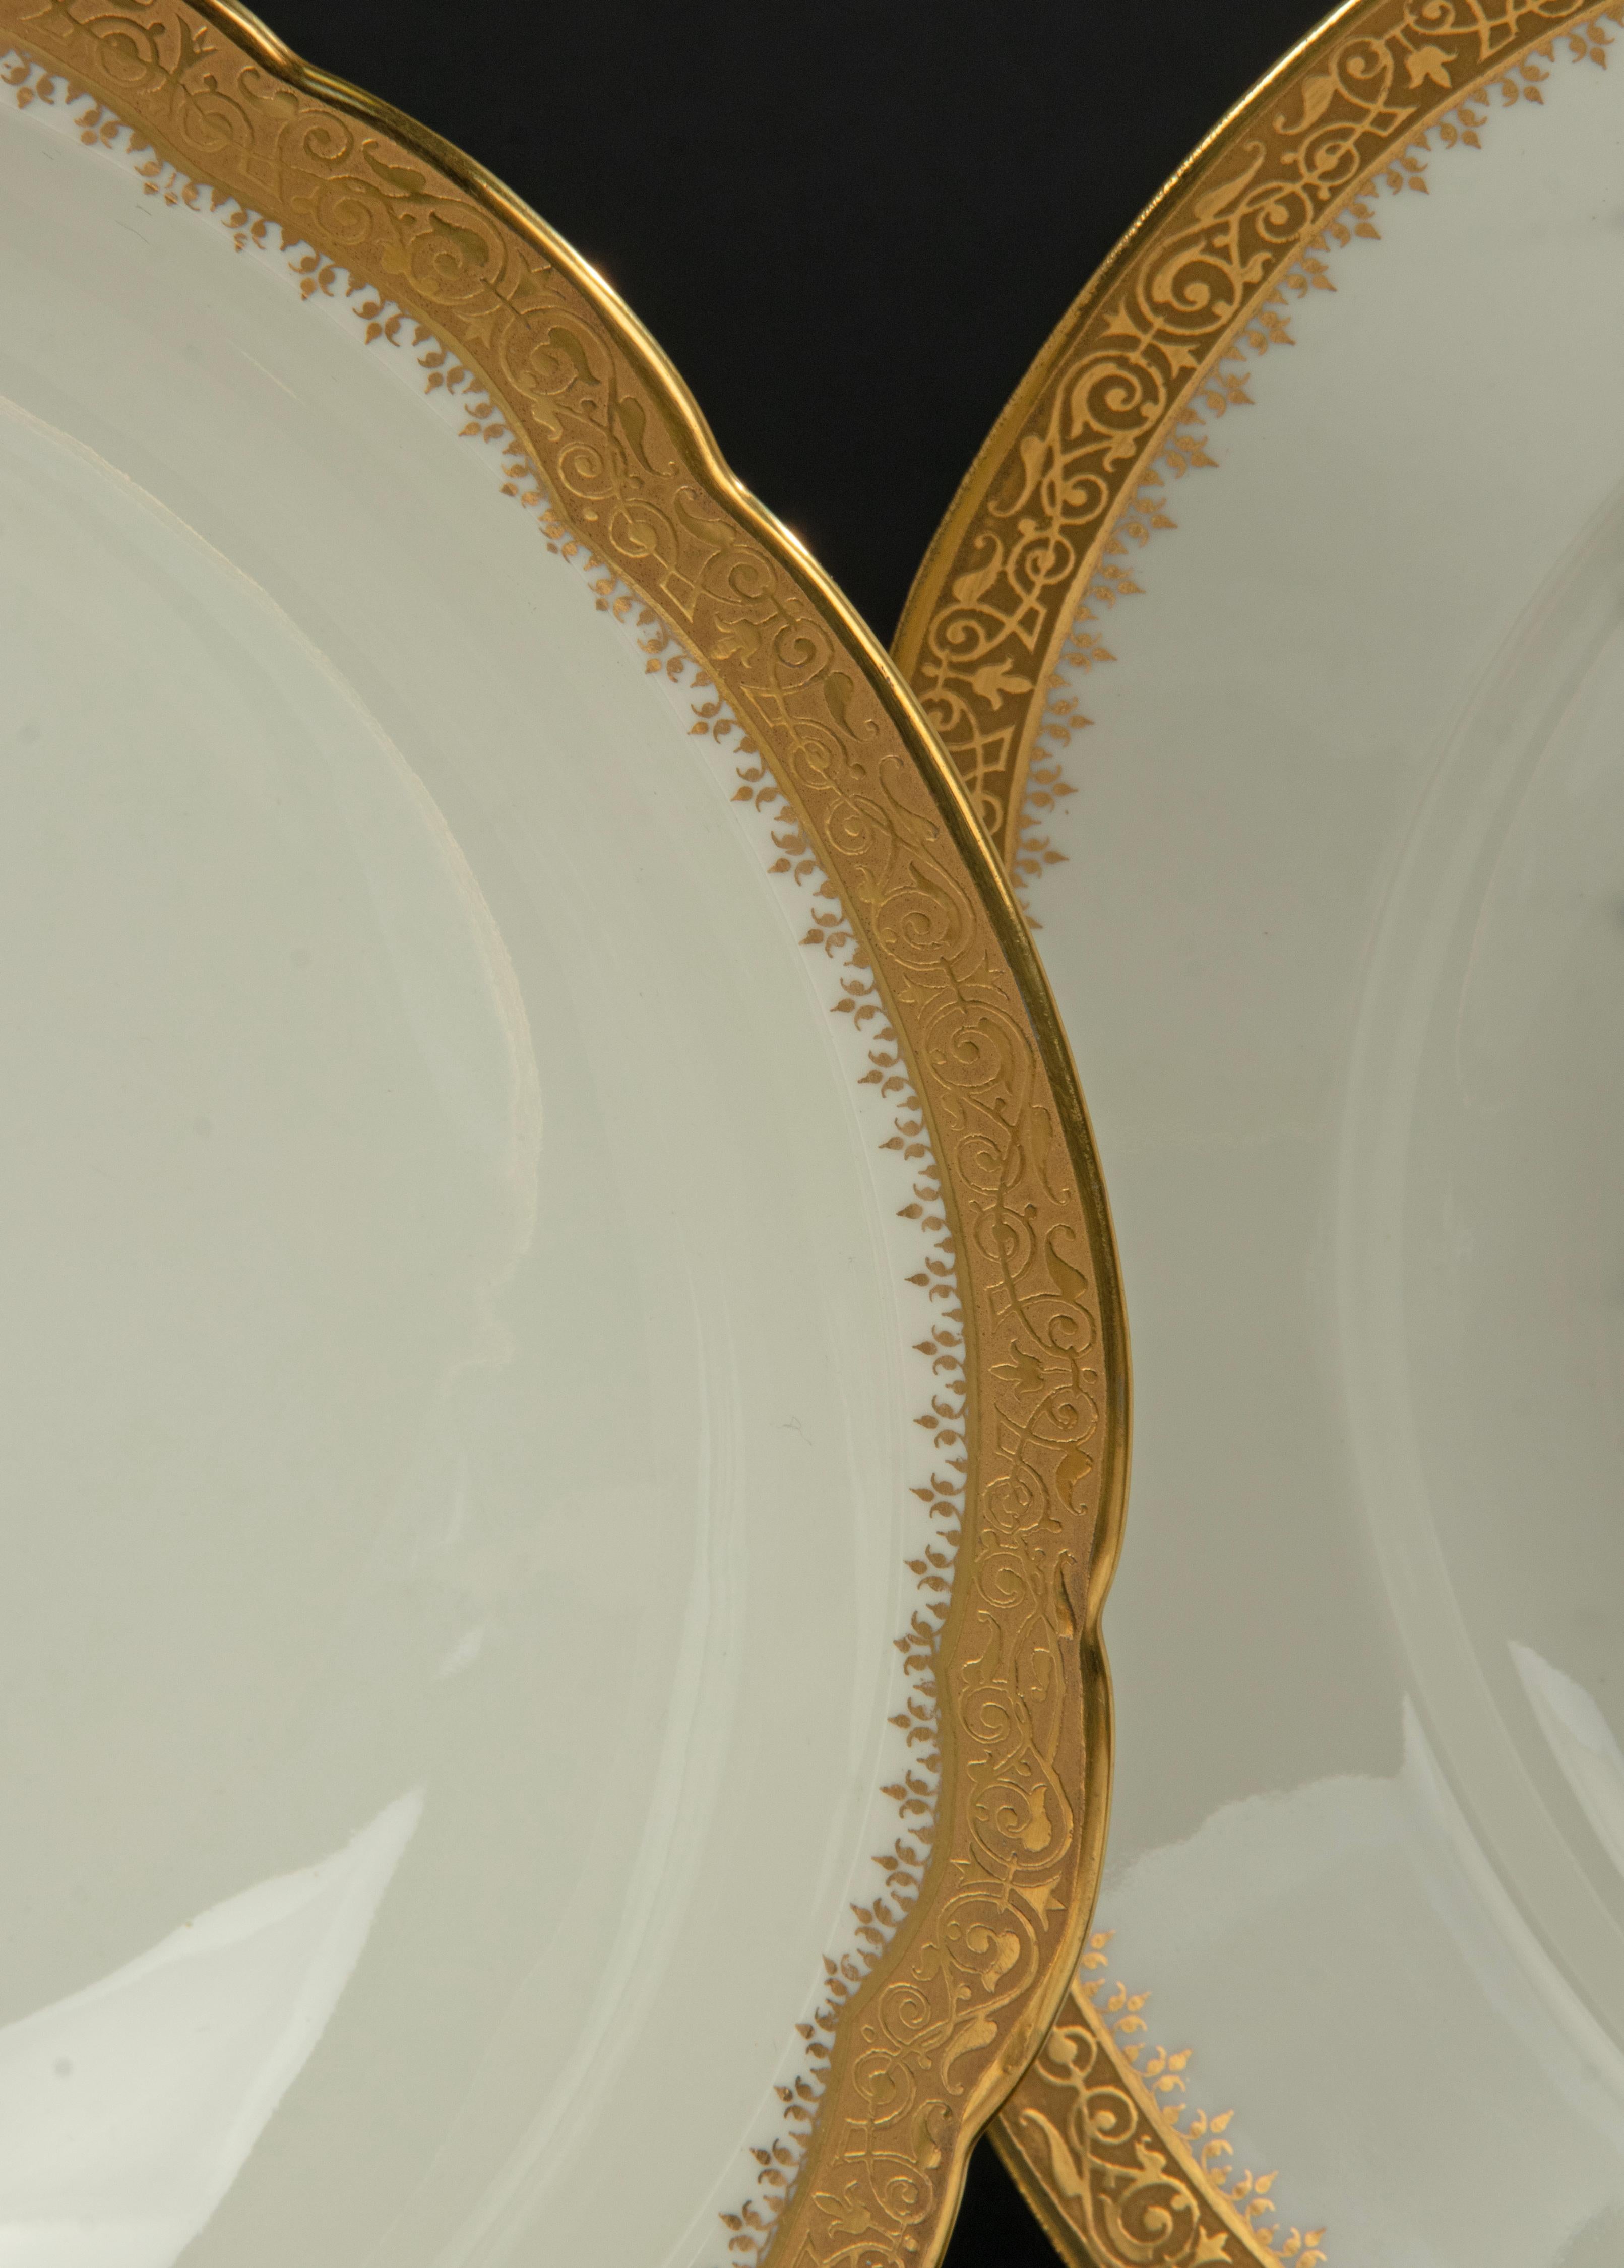 51-Piece Set Porcelain Tableware for 12 Persons - Limoges Incrusted Gold Trims 12